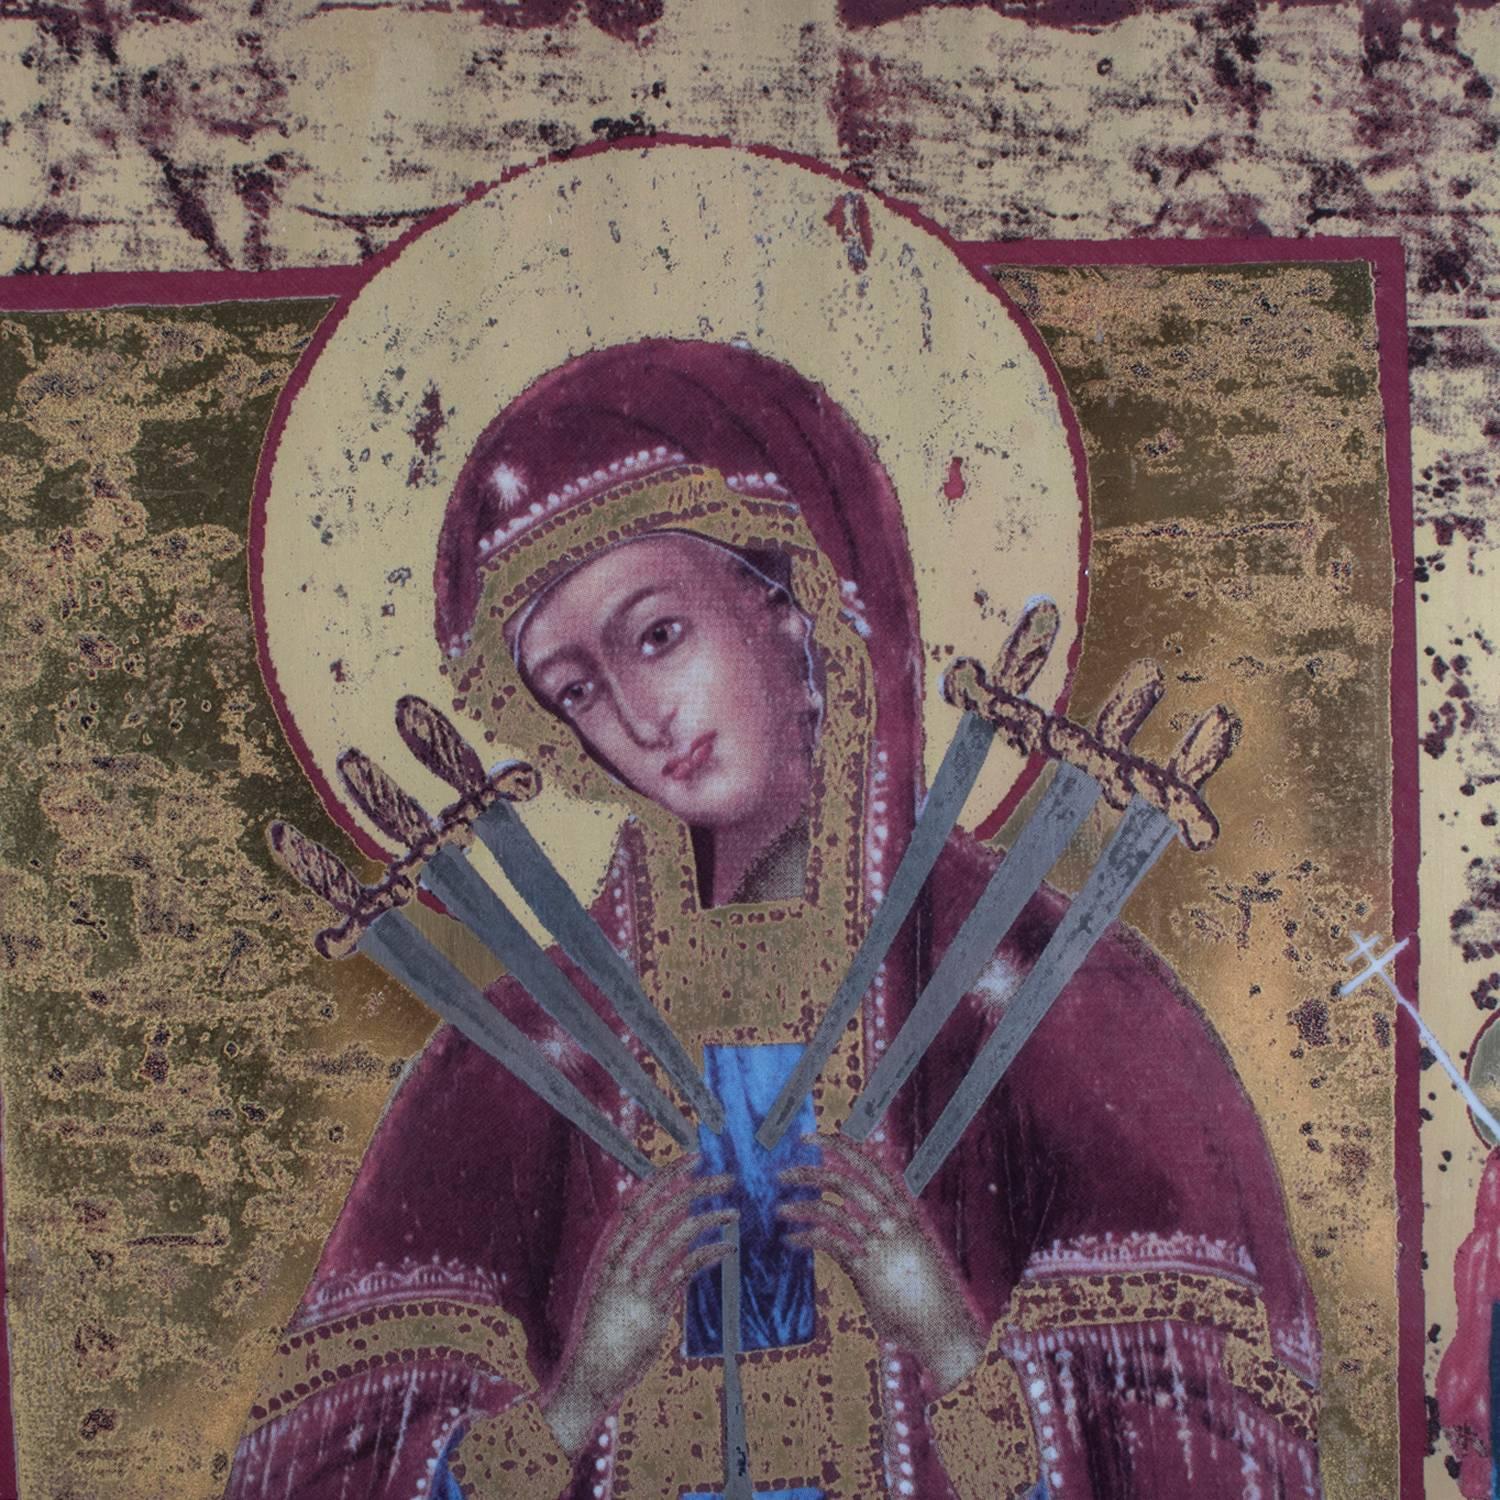 Russian orthodox icon depicts our lady of Sorrows printed on porcelain with hand gilt accents, en verso reads 